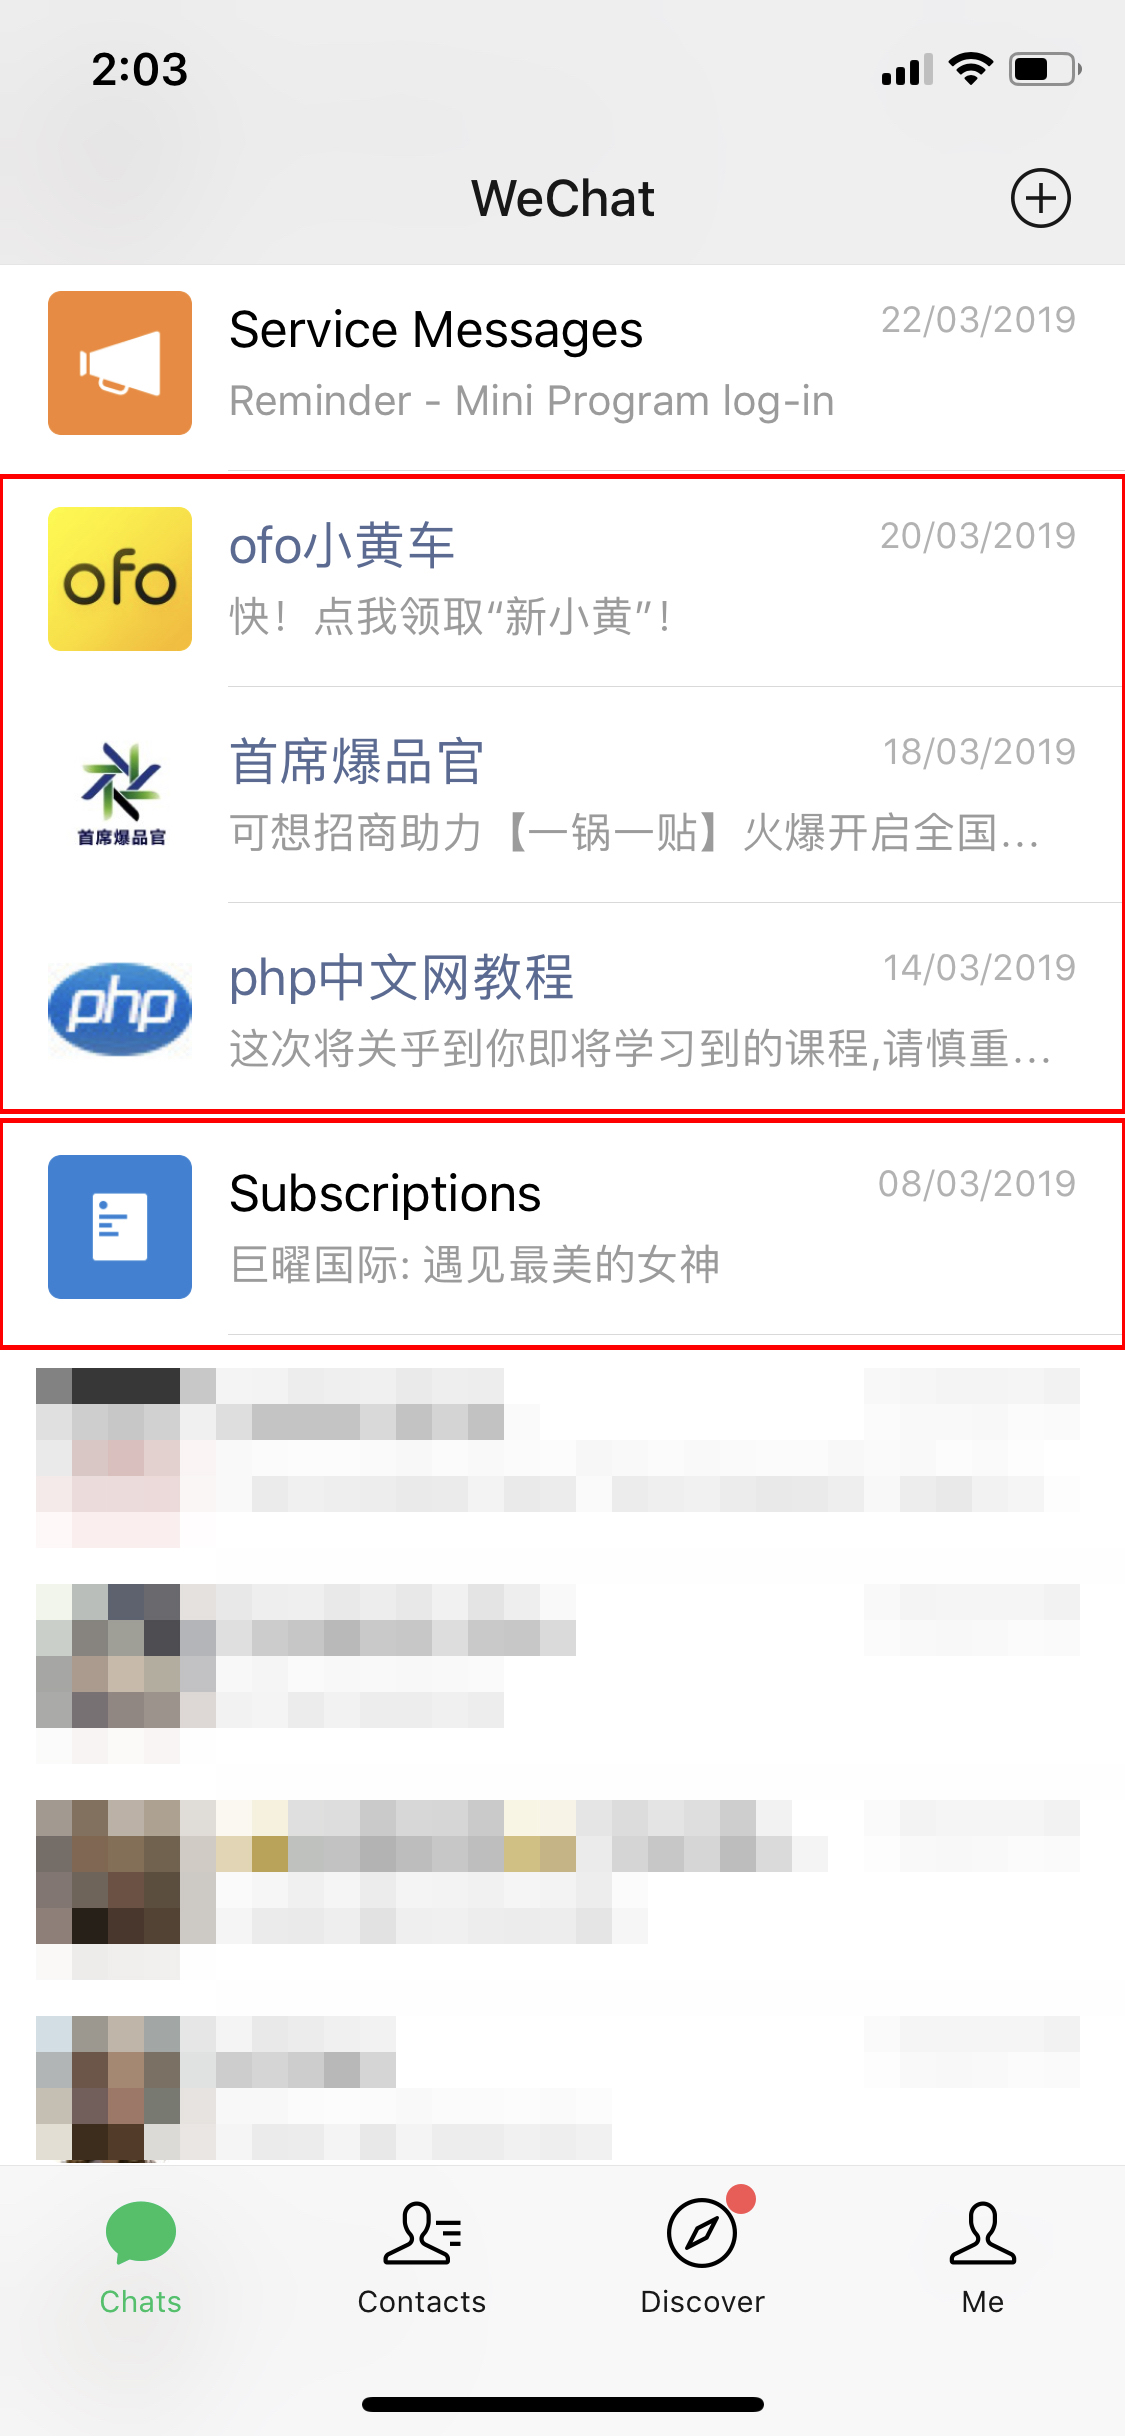 Difference between wechat subscription and service account